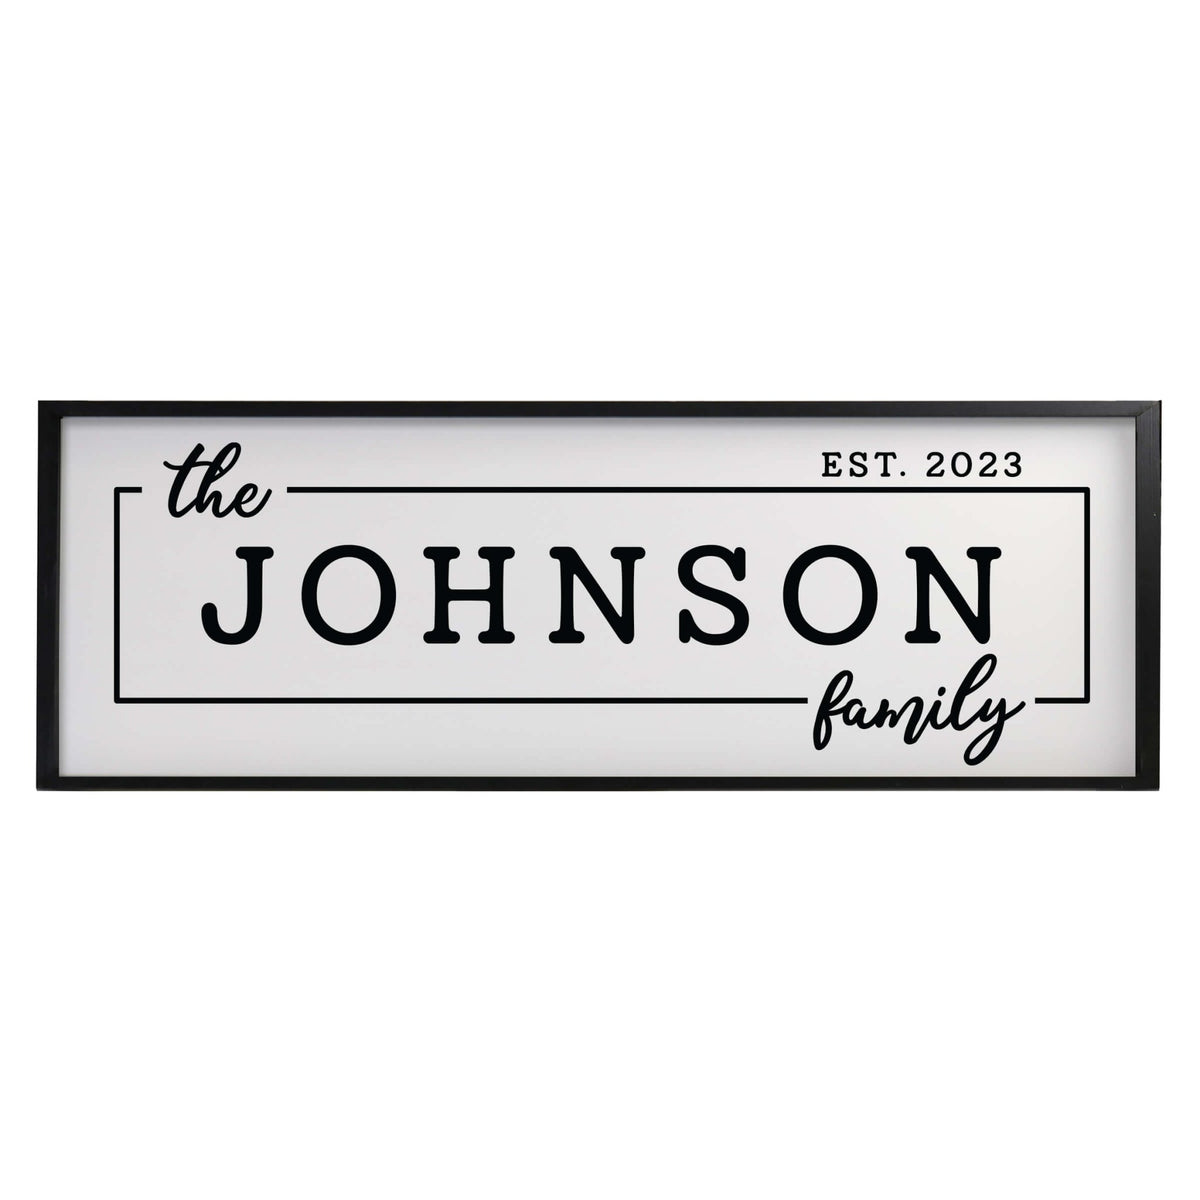 Personalized Family Wall Hanging Décor Framed Shadow Box For Home Décor - The Johnson Family - LifeSong Milestones